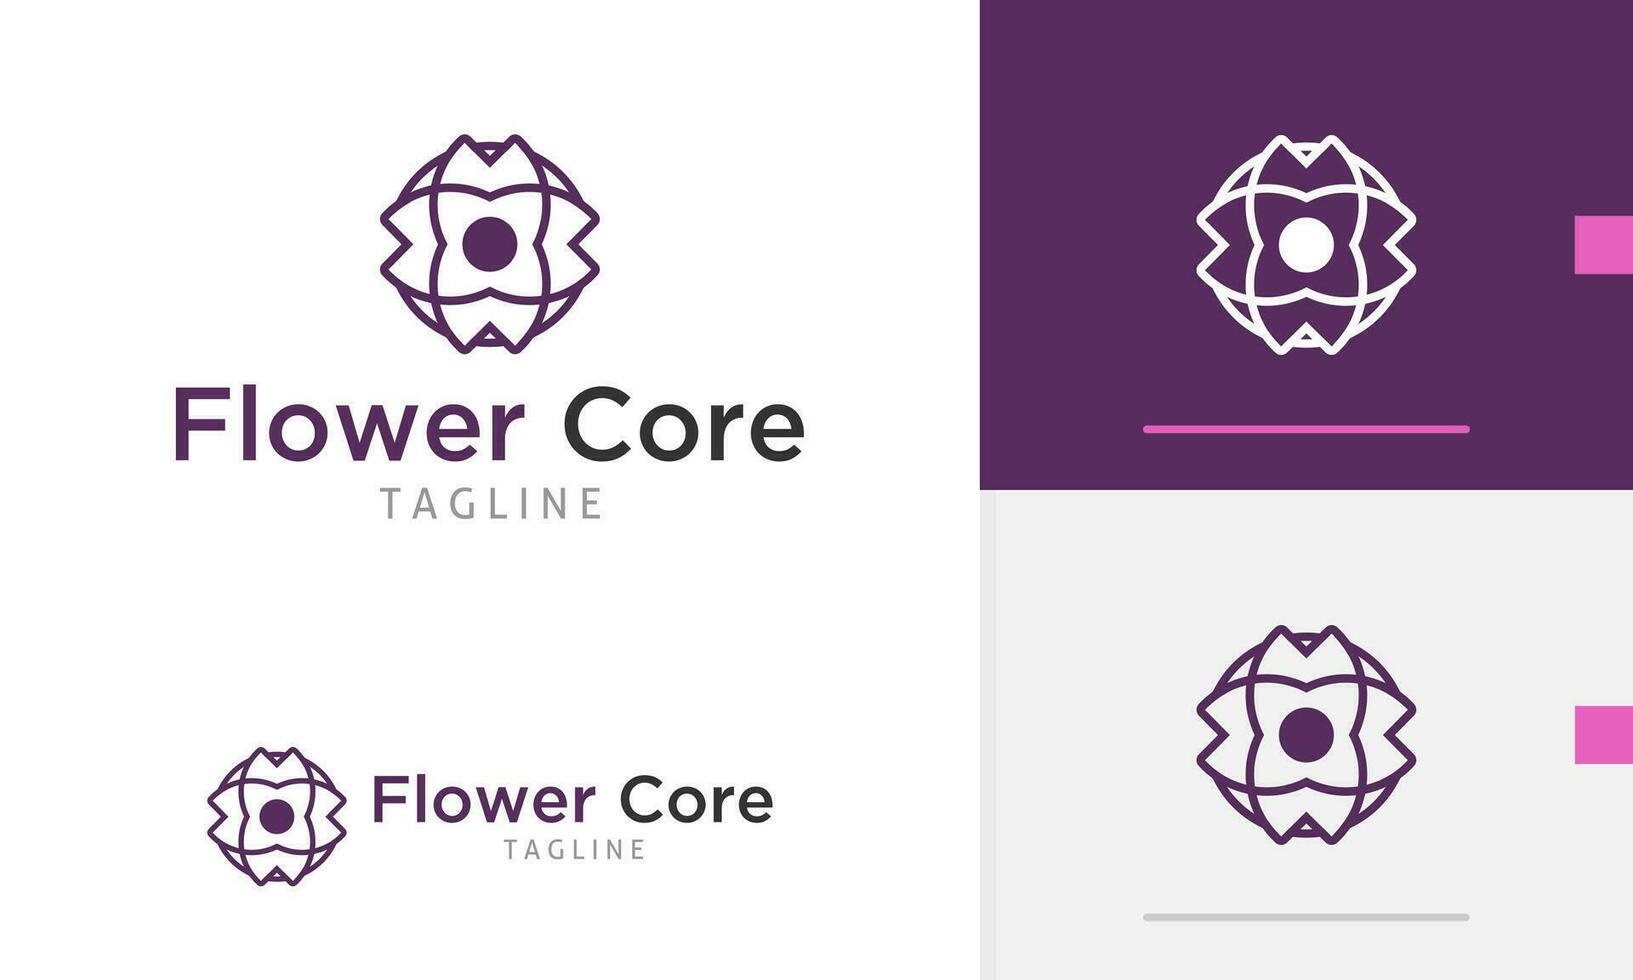 Logo design icon abstract geometric beautiful flower pattern in flat modern style vector